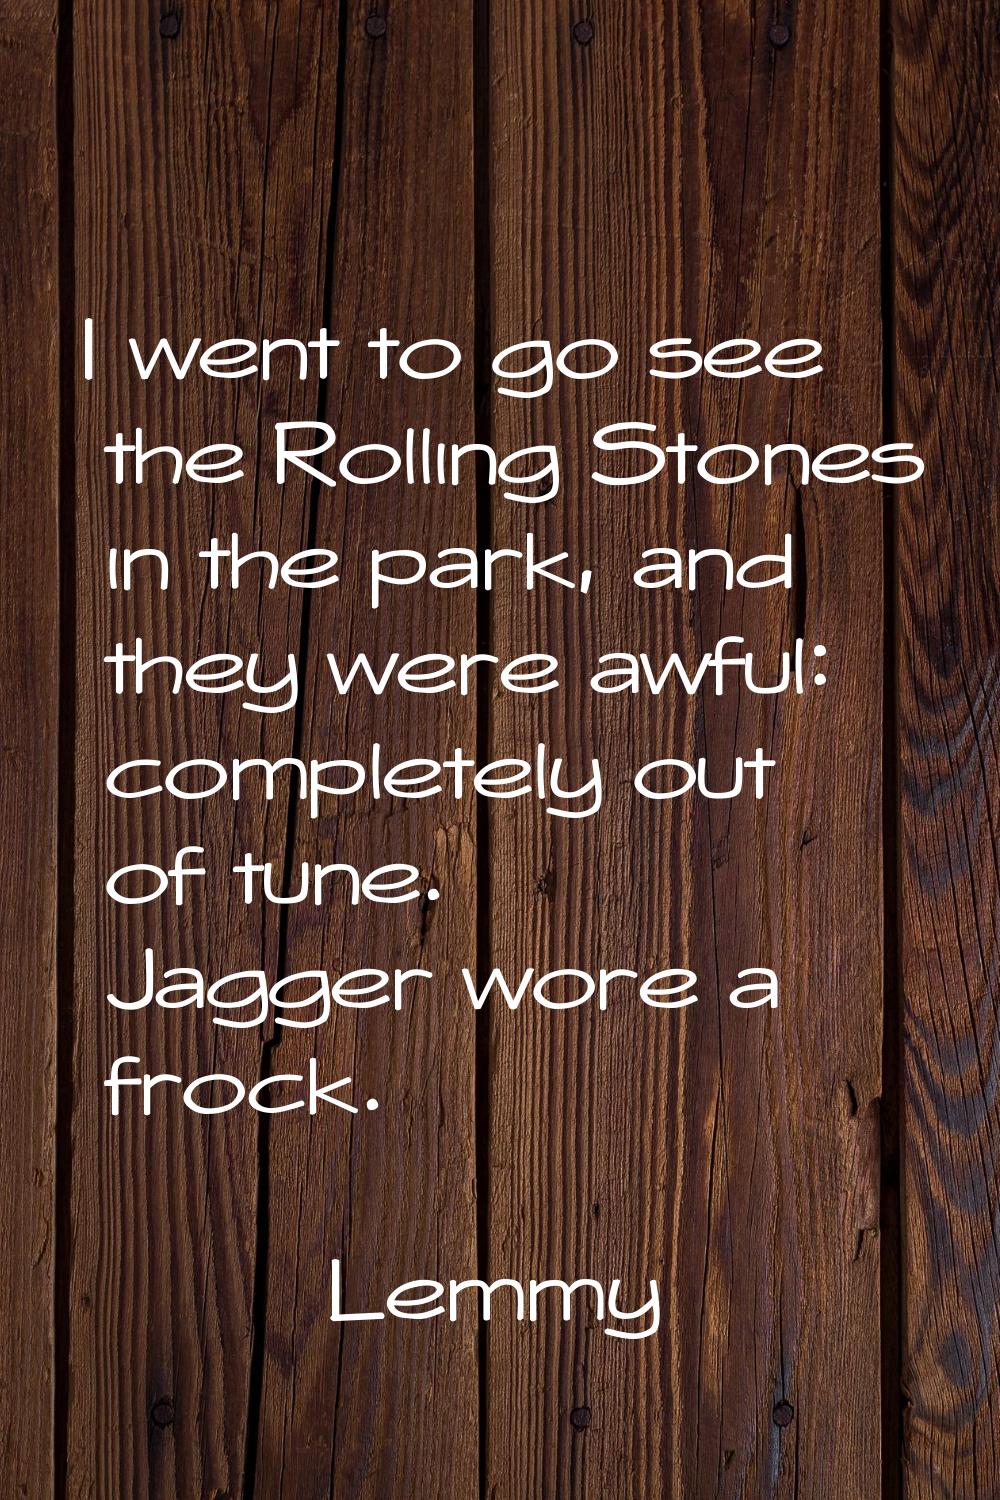 I went to go see the Rolling Stones in the park, and they were awful: completely out of tune. Jagge